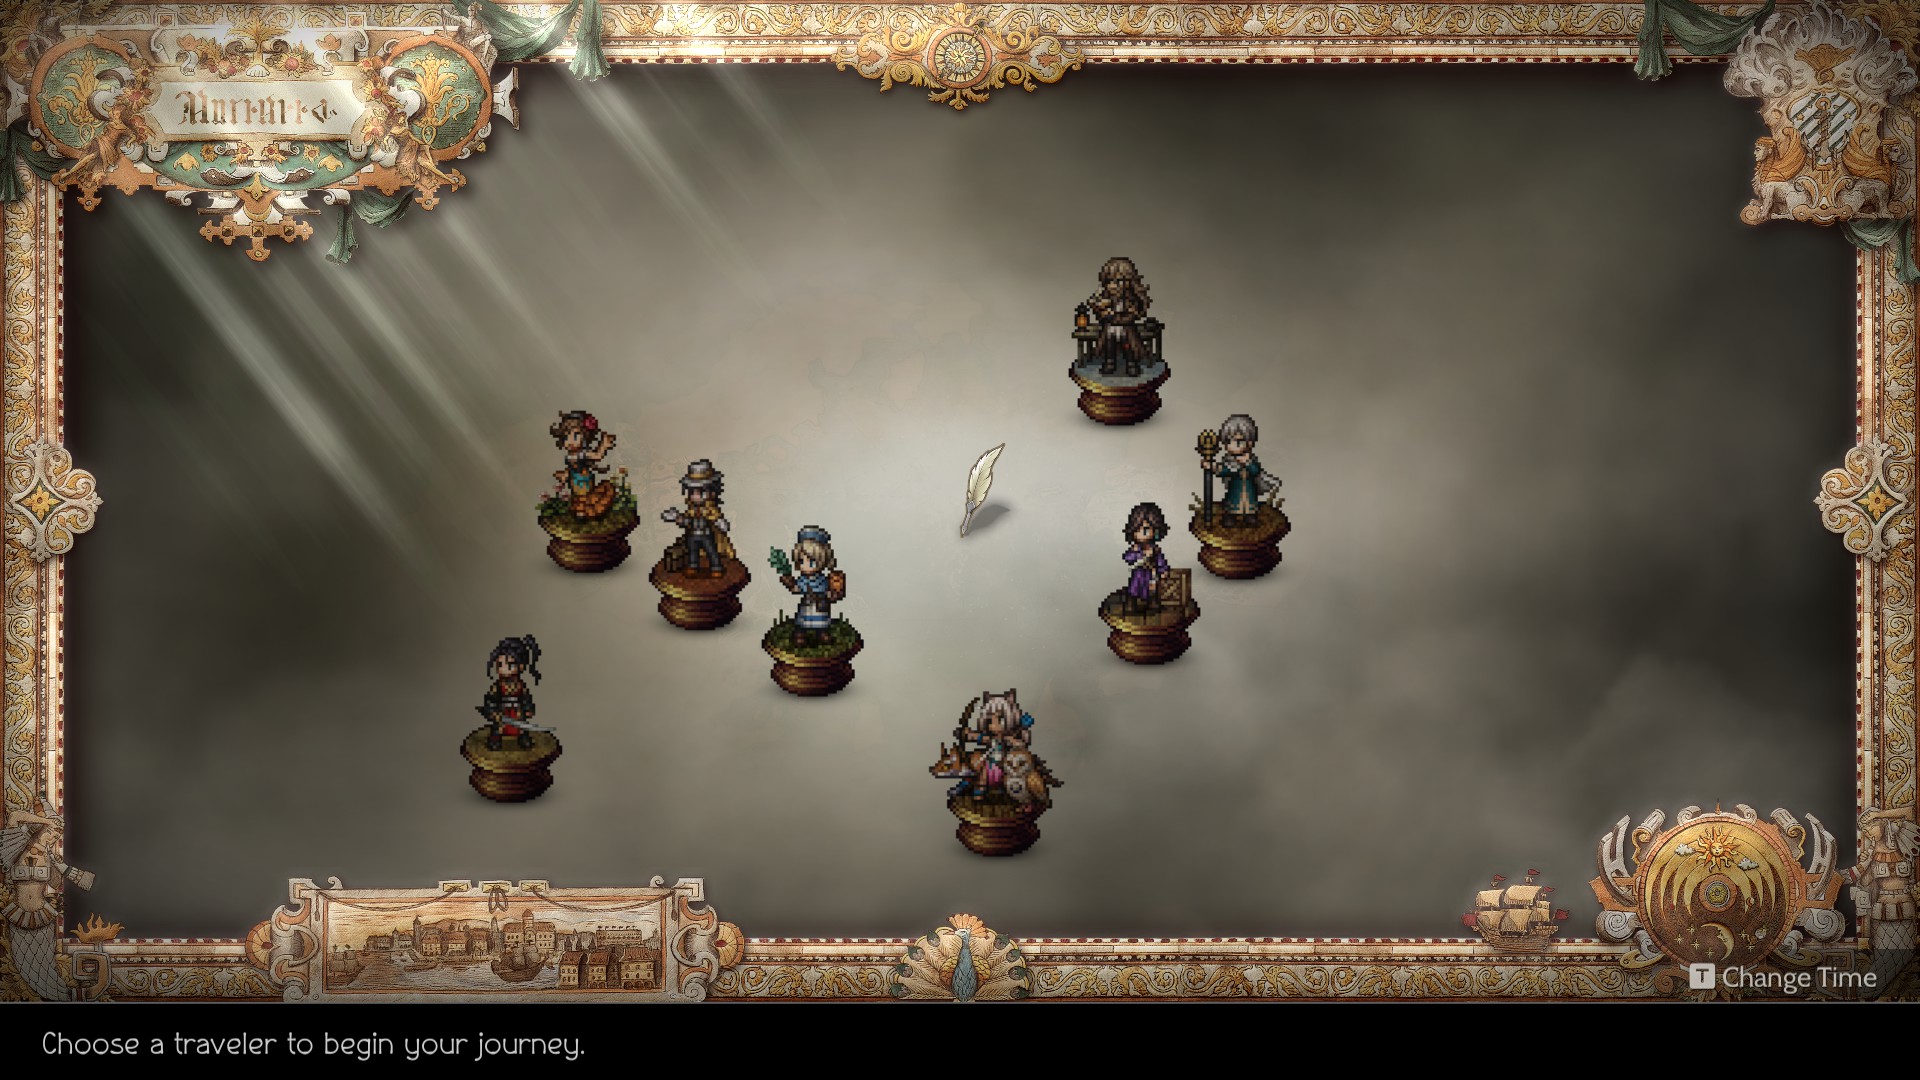 Octopath Traveler II Is Out Now, Which Character Will You Start With?